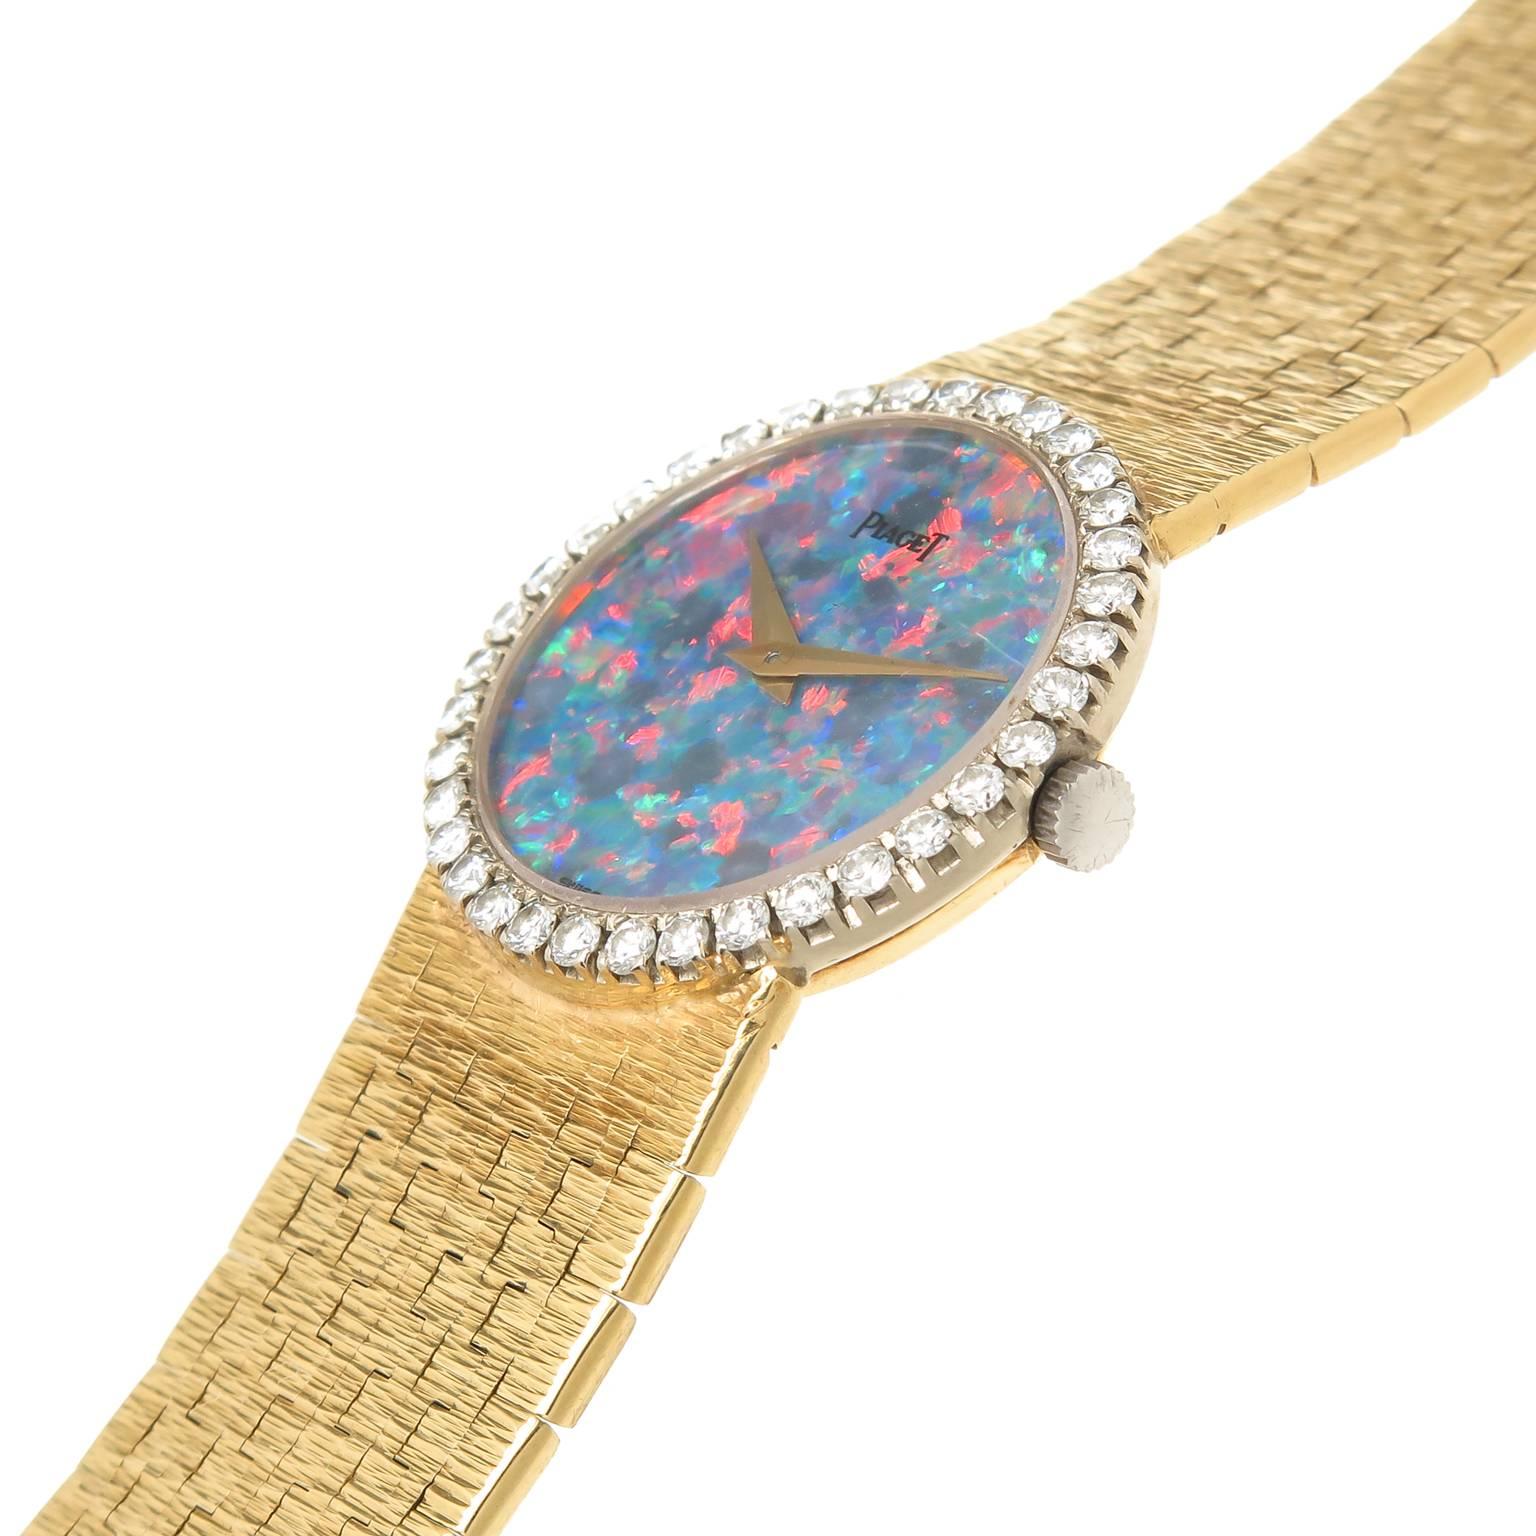 Circa 1970s Piaget, 18K Yellow Gold case measuring 29 MM and having a Factory Diamond set bezel containing 36 Round Brilliant cut Diamonds totaling 
1.10 Carat. Black Opal Dial, gold hands, mechanical, manual winding 17 Jewel movement. 5/8 inch